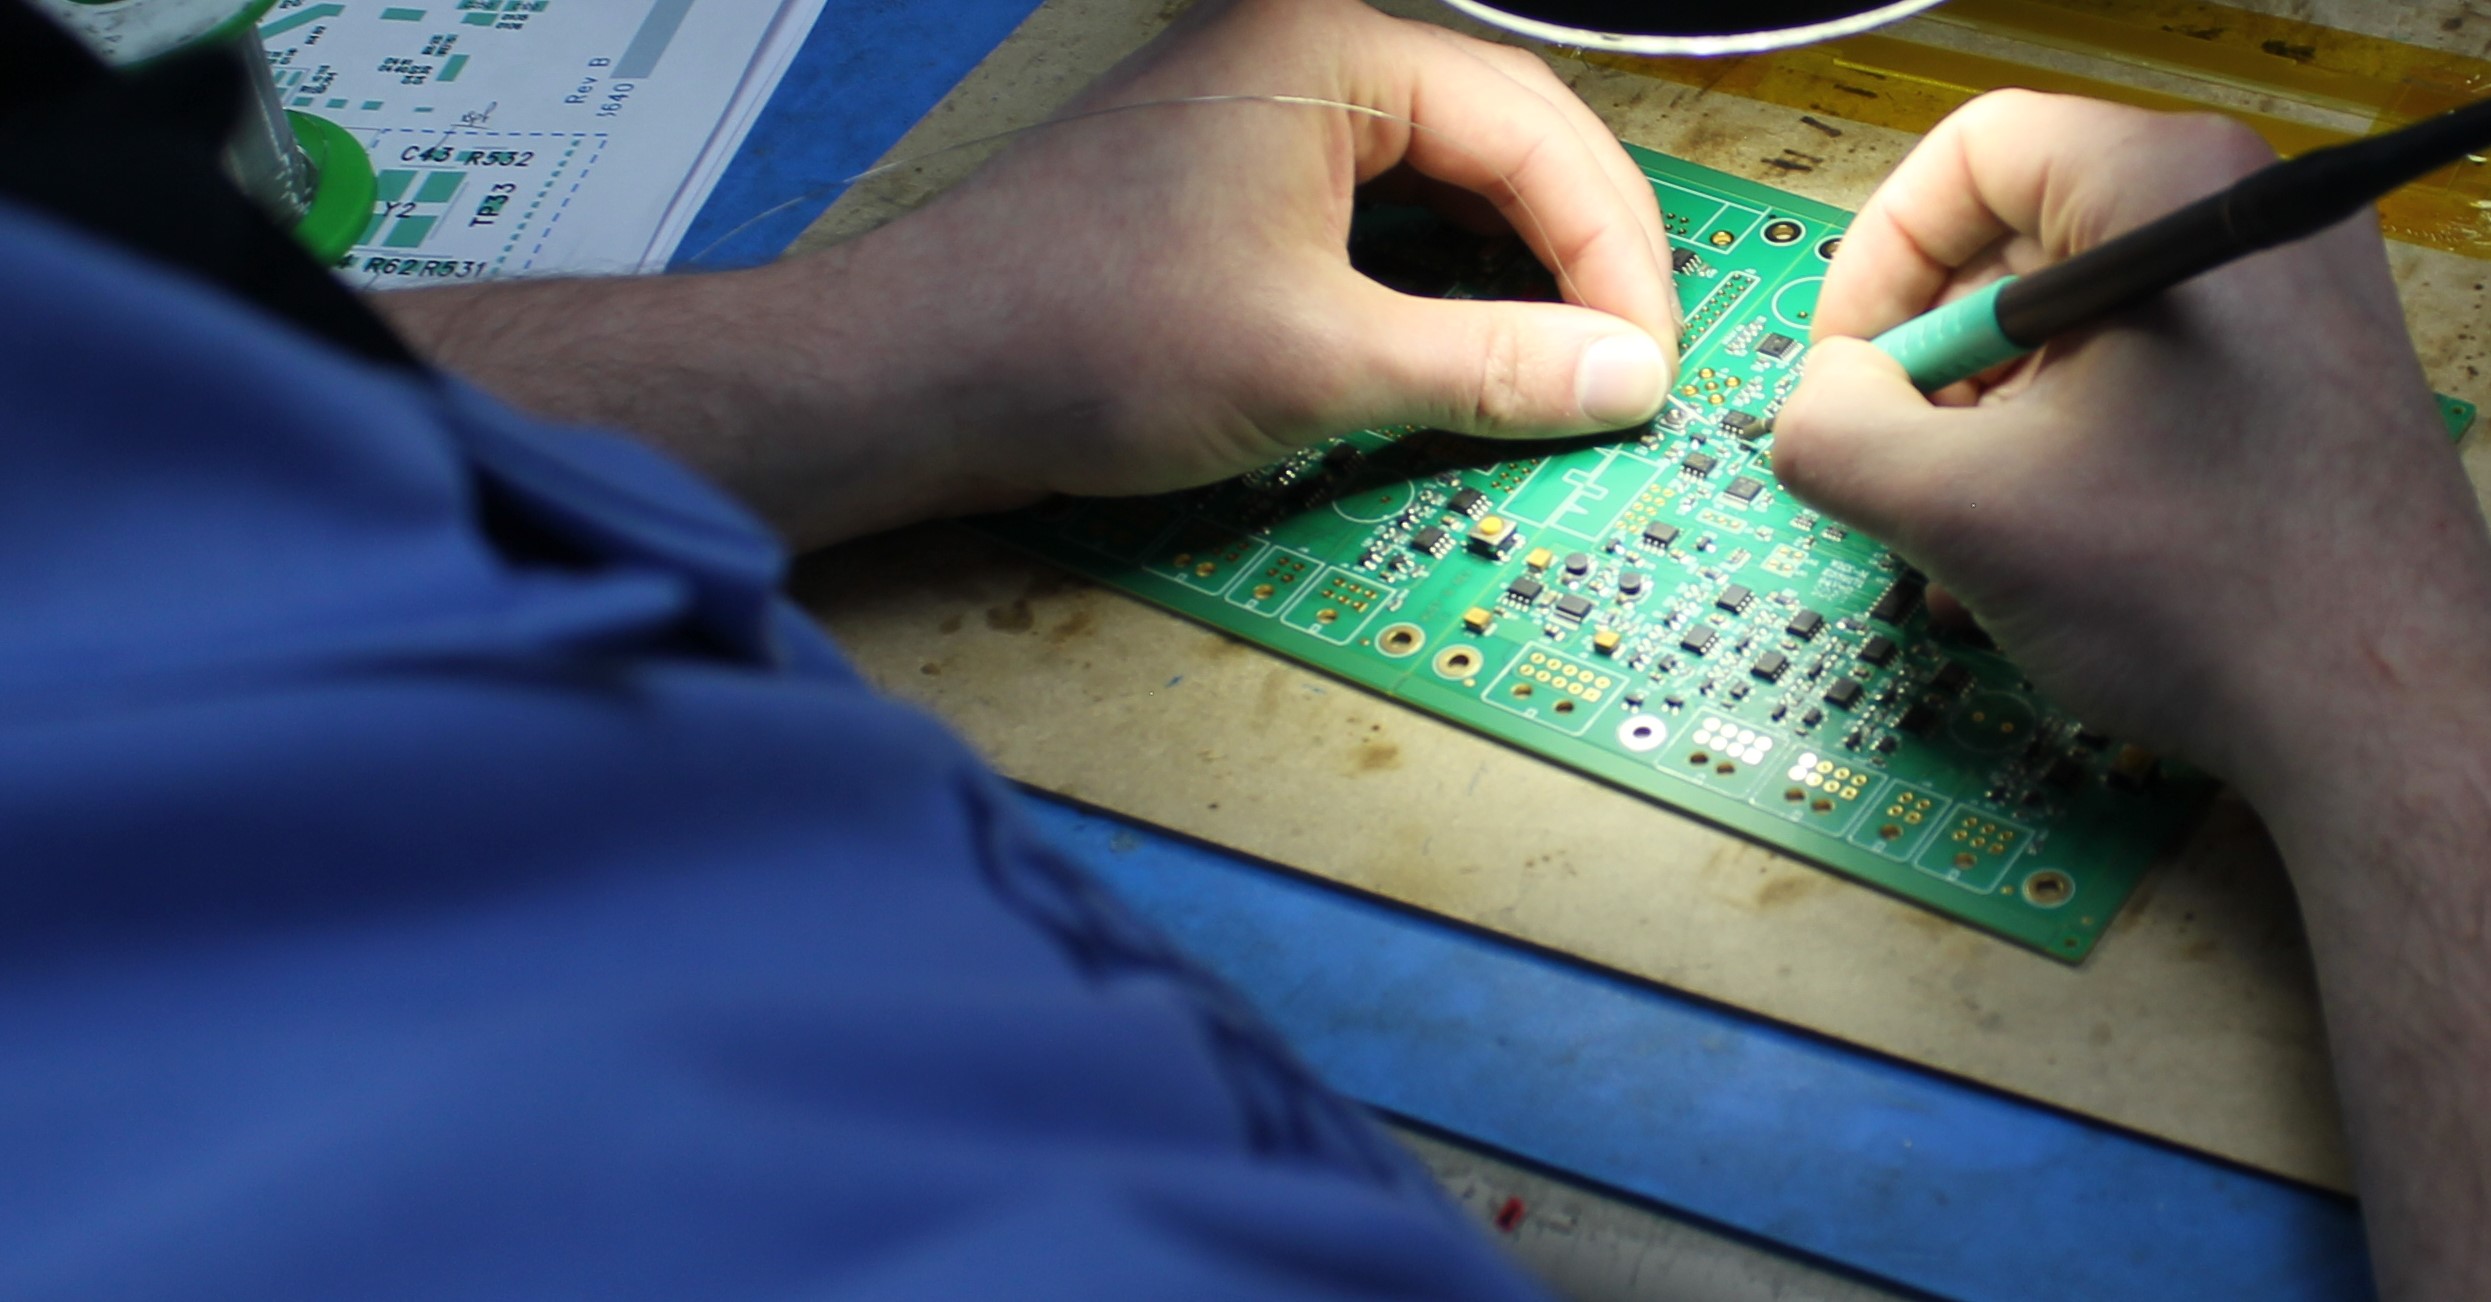 An image of an operator soldering a surface mount component to a printed circuit board using a soldering iron